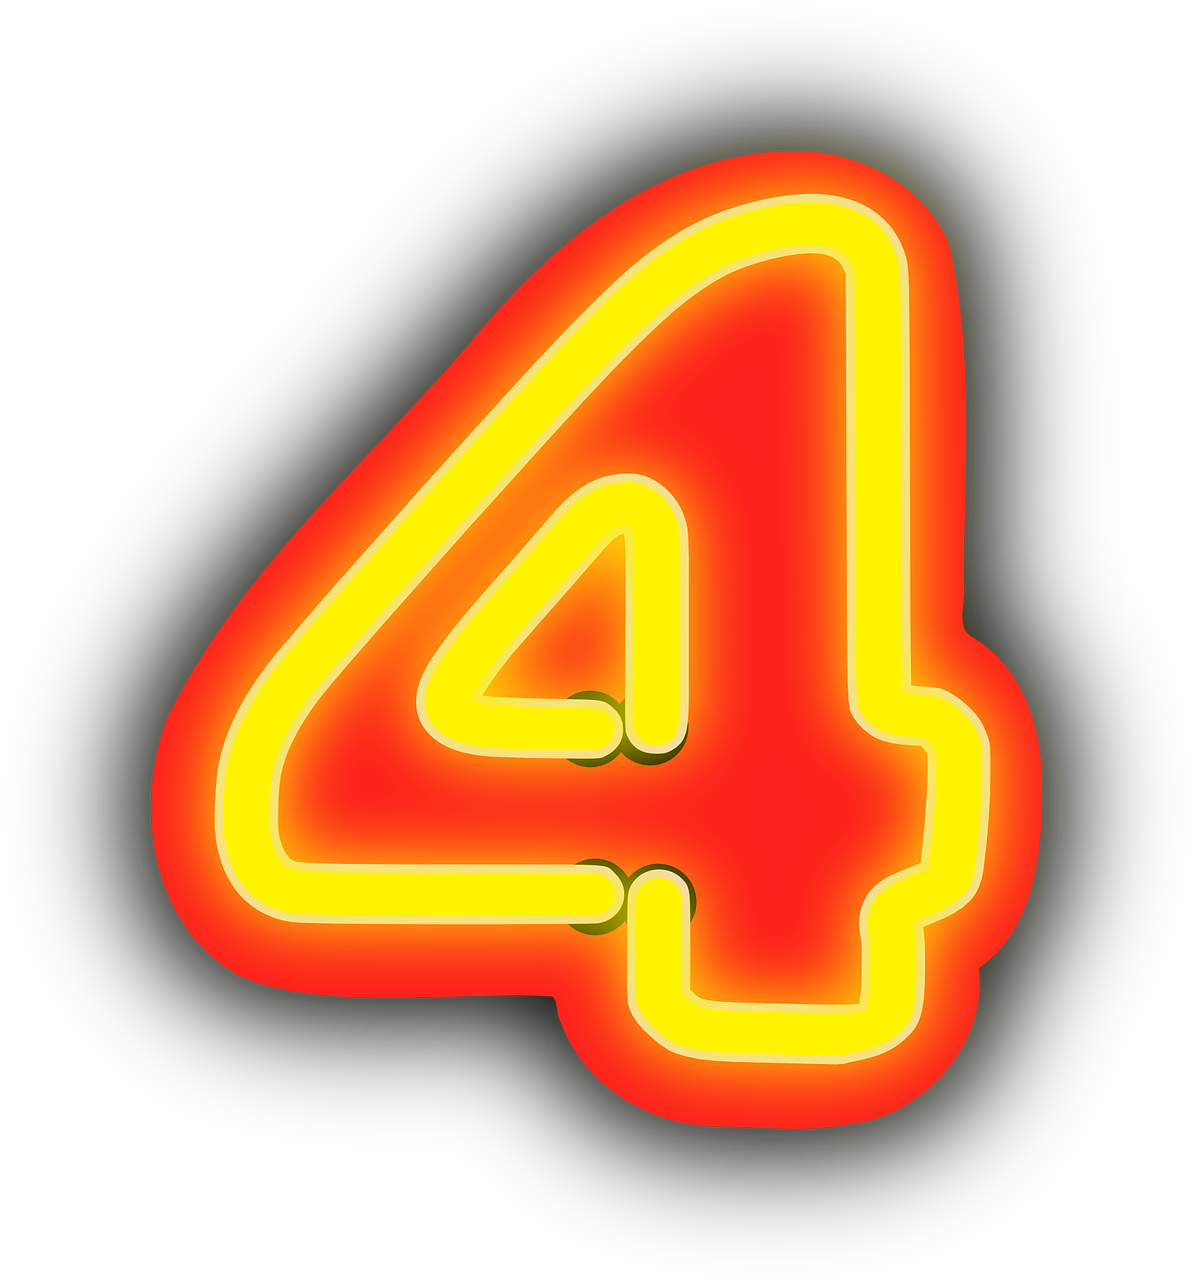 Neon Glow Number4 PNG image